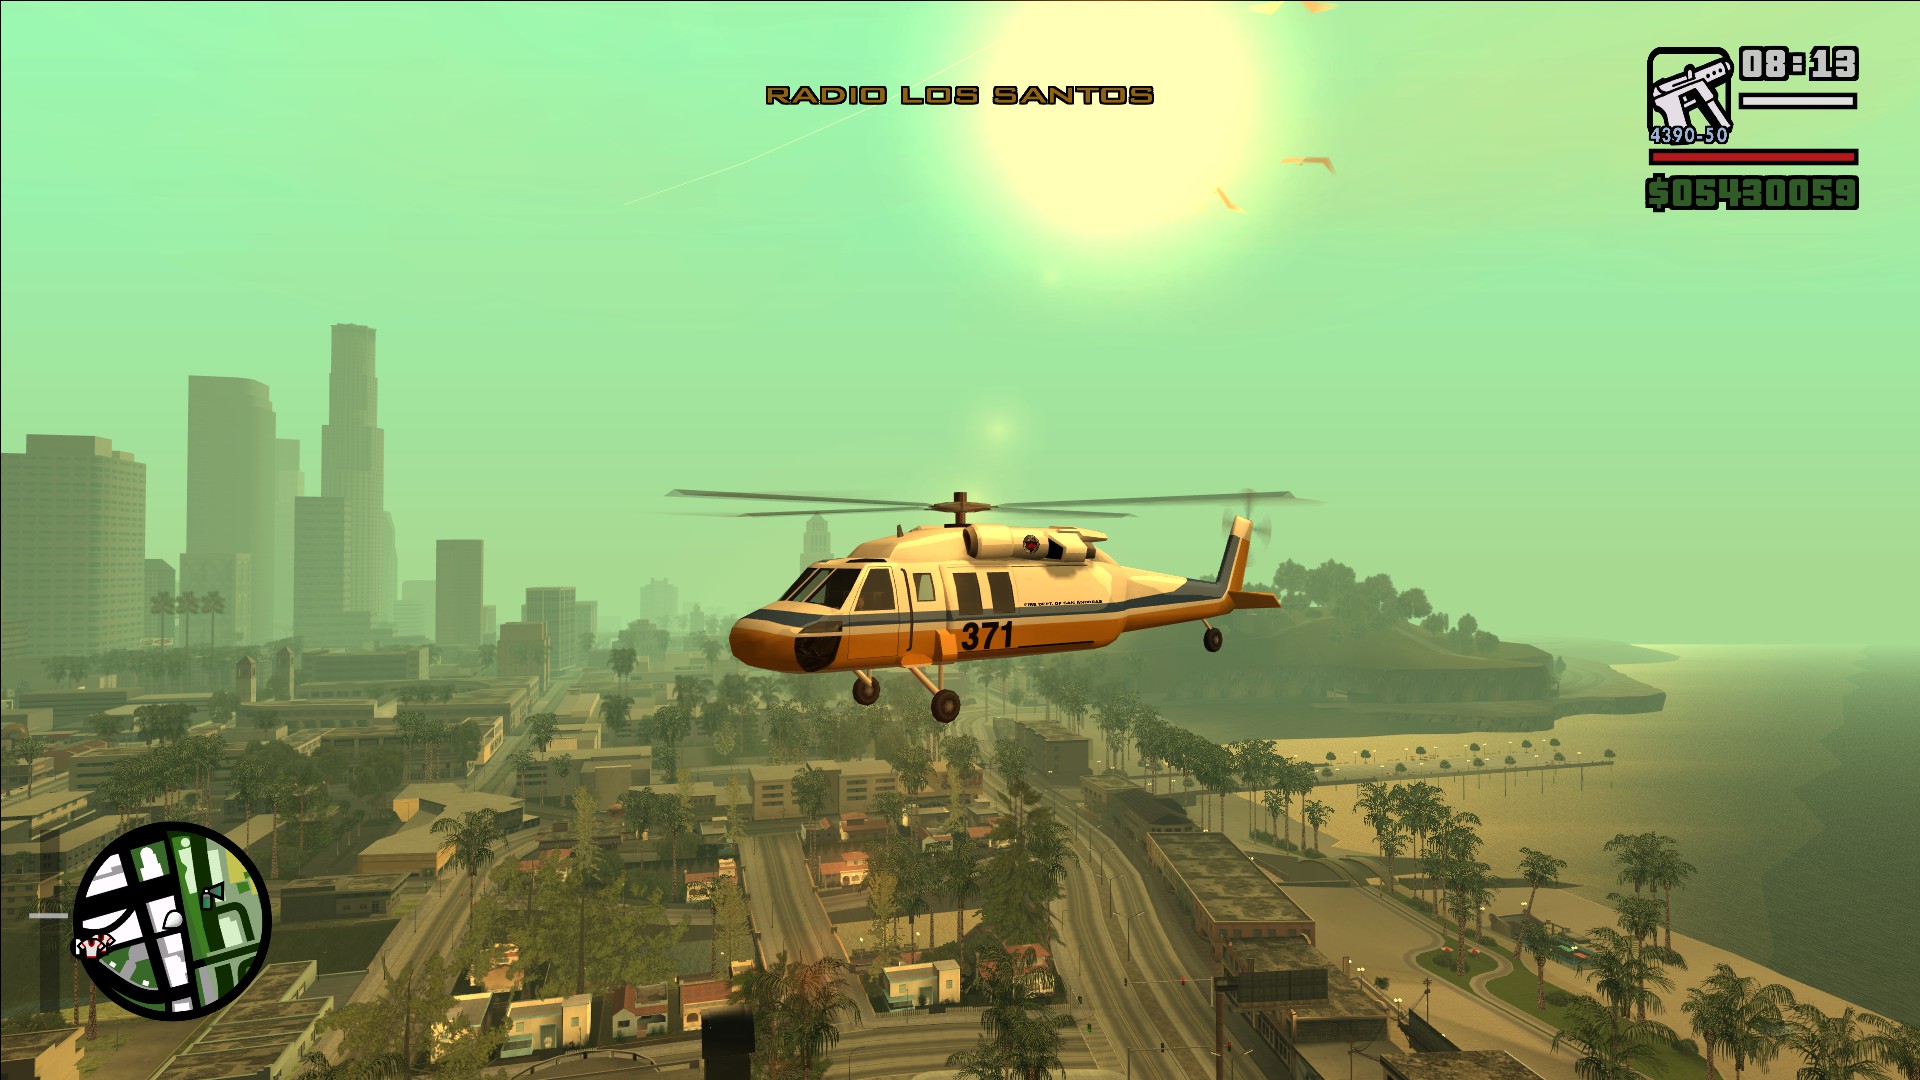 Grand Theft Auto San Andreas FIXER PACK (STEAM) at Grand Theft Auto: San  Andreas Nexus - Mods and community